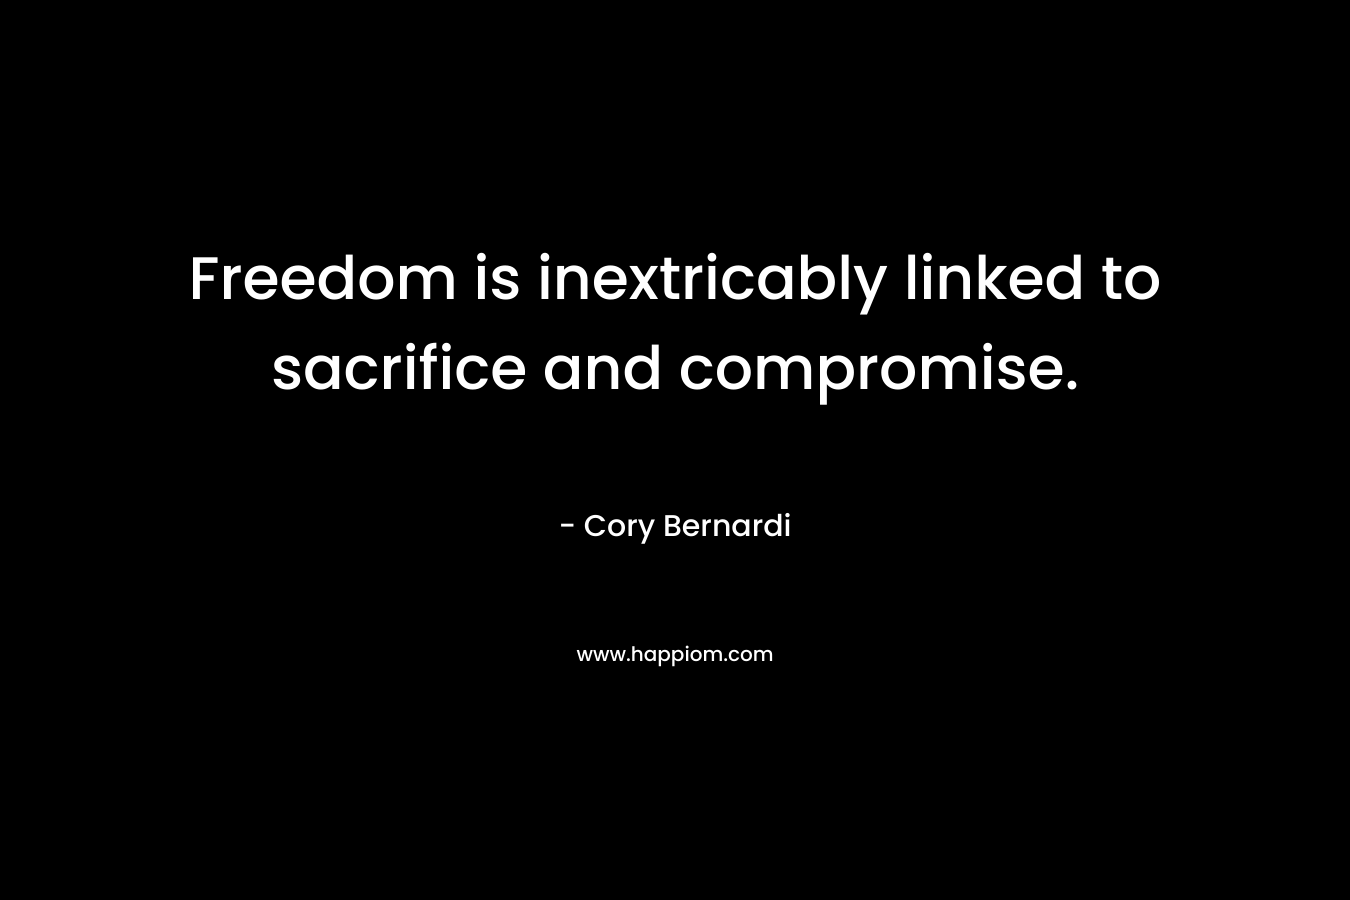 Freedom is inextricably linked to sacrifice and compromise. – Cory Bernardi